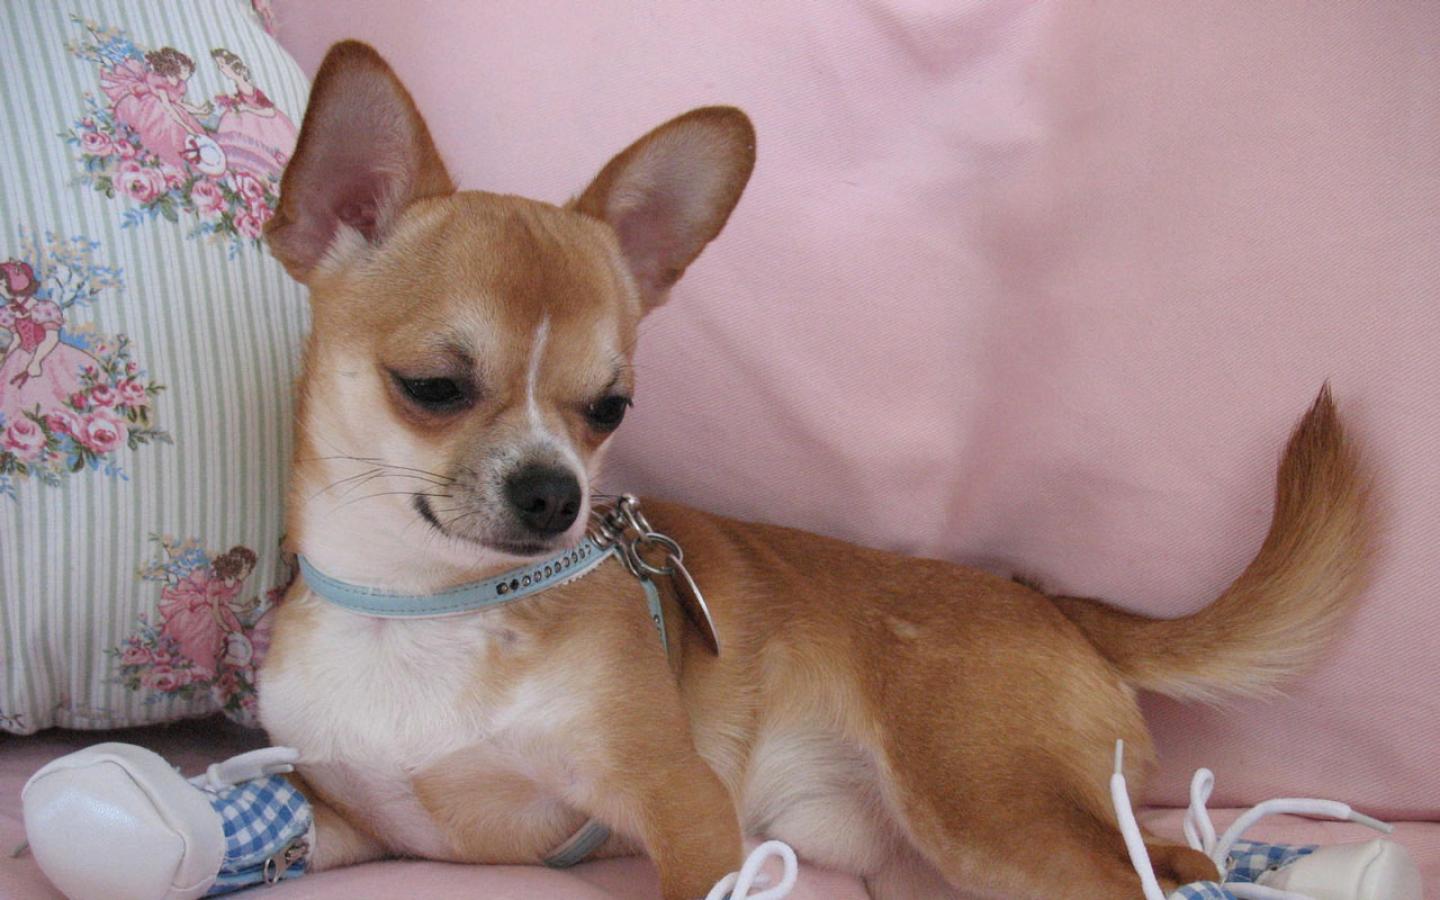 Chihuahua with Booties Wallpaper #1 1440 x 900 